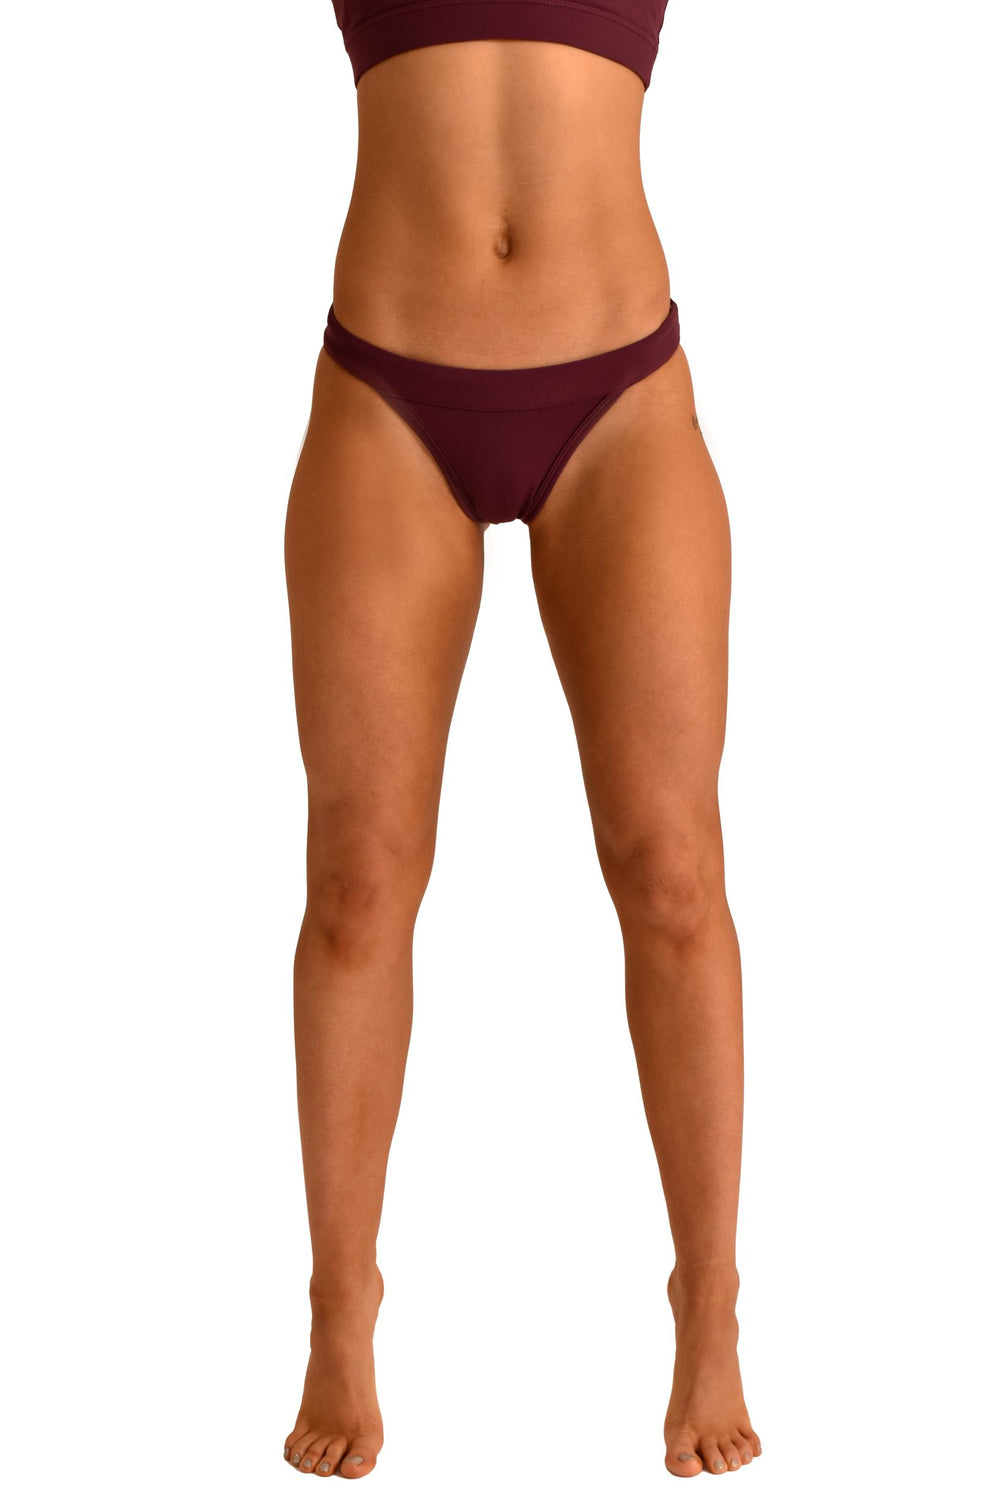 OFF THE POLE Tanga Shorts - Burgundy *SIZE XS ONLY*